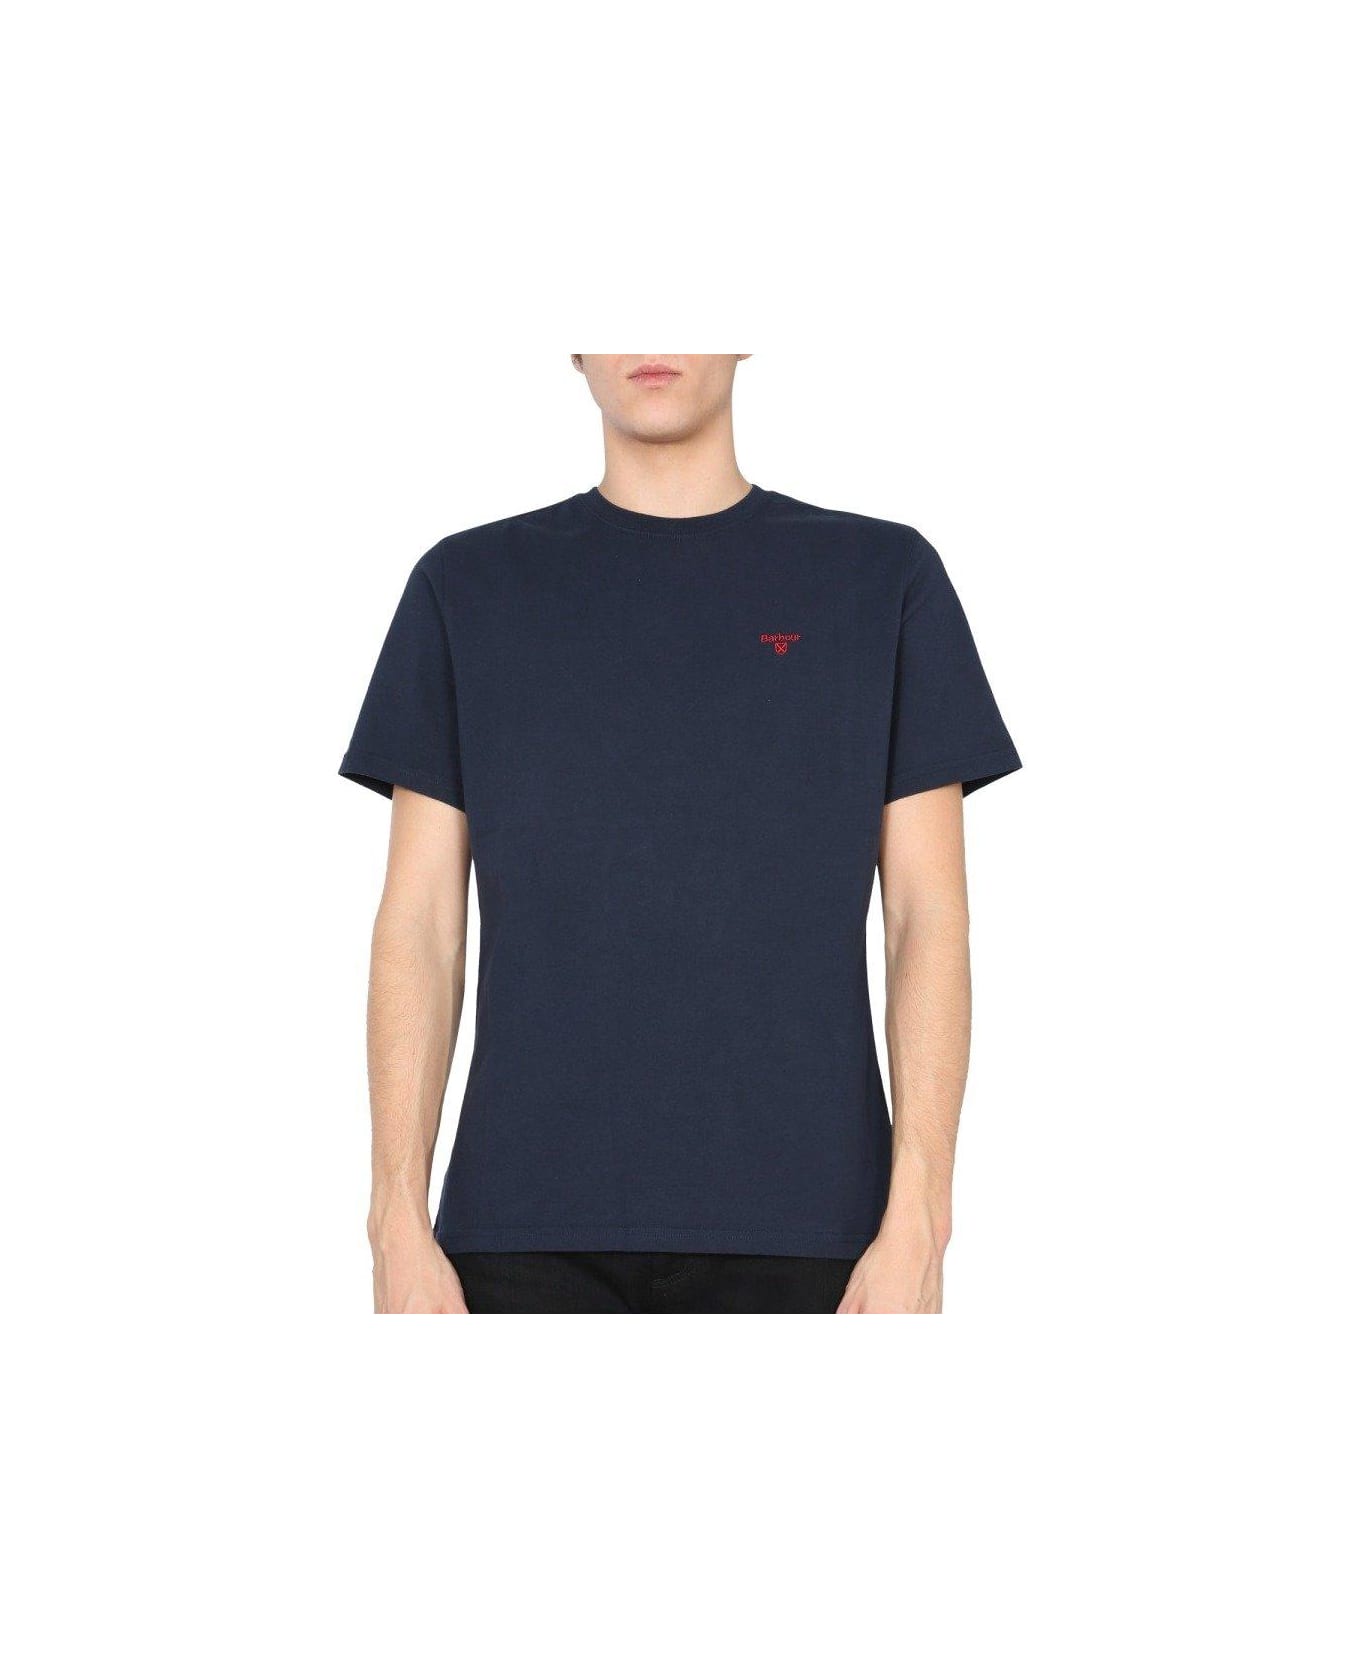 Barbour Logo Embroidered T-shirt - Blue